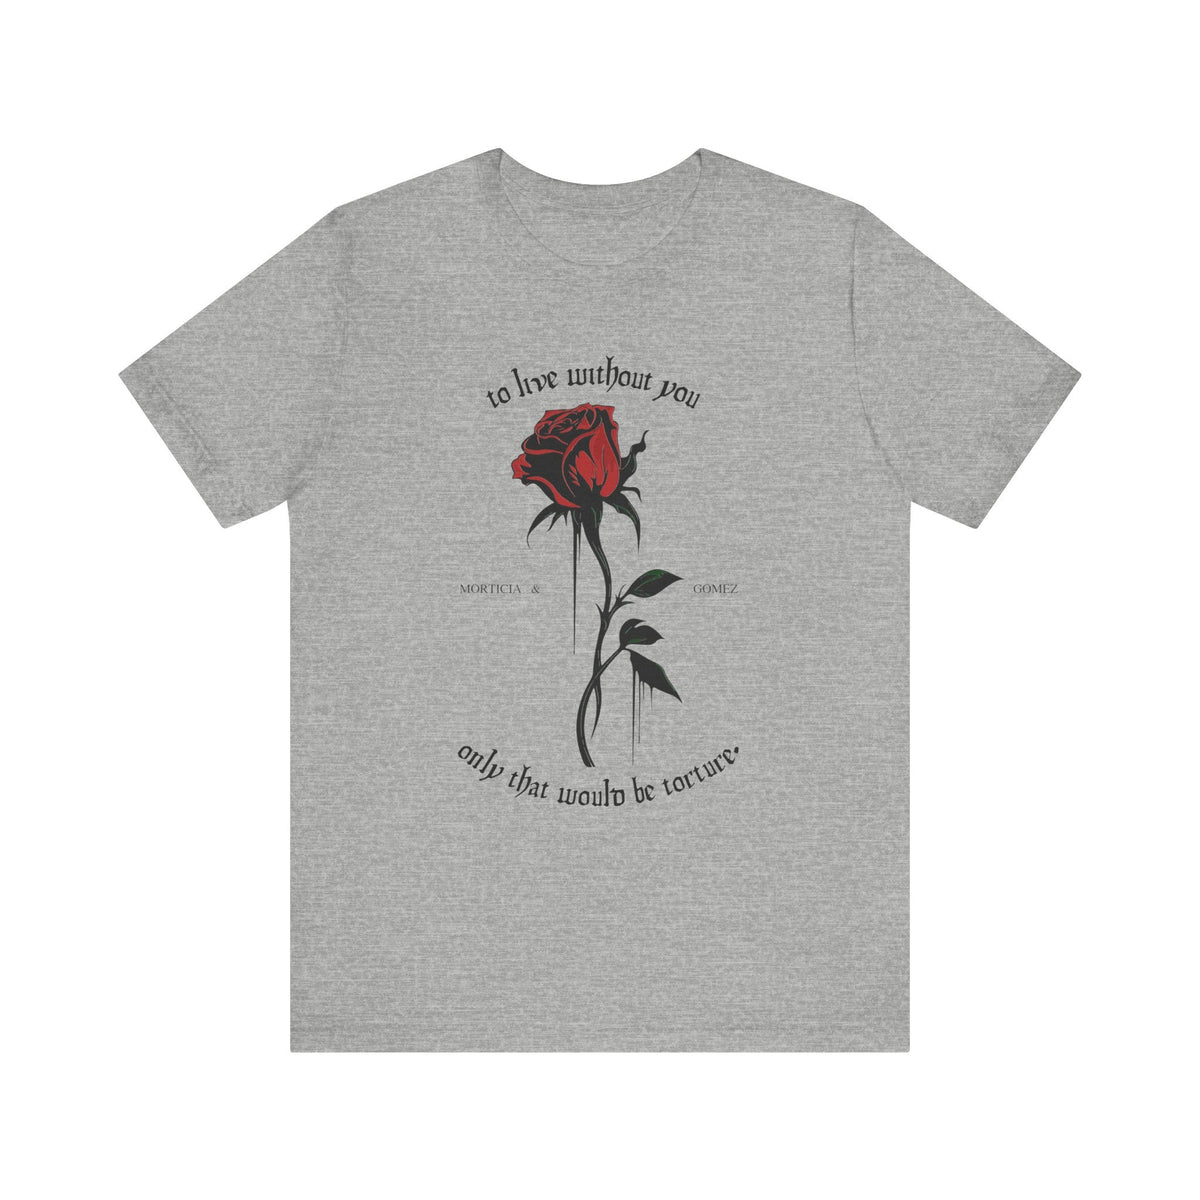 Morticia & Gomez 'To Live Without You' Gothic Rose Tee - Goth Cloth Co.T - Shirt75269563350429608696